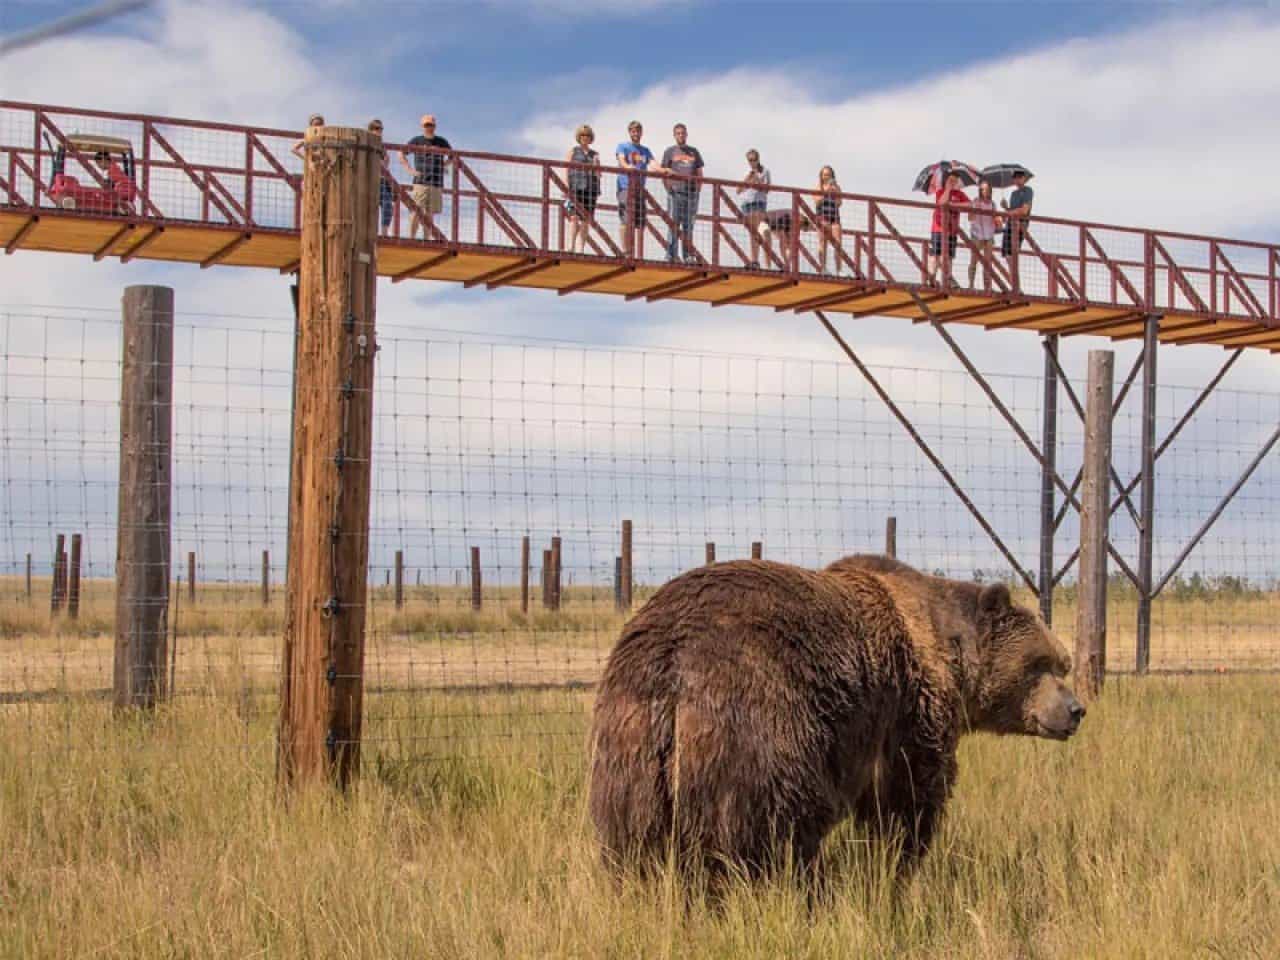 Tourist watching grizzly bear from tall bridge at The Wildlife Sanctuary in Colorado